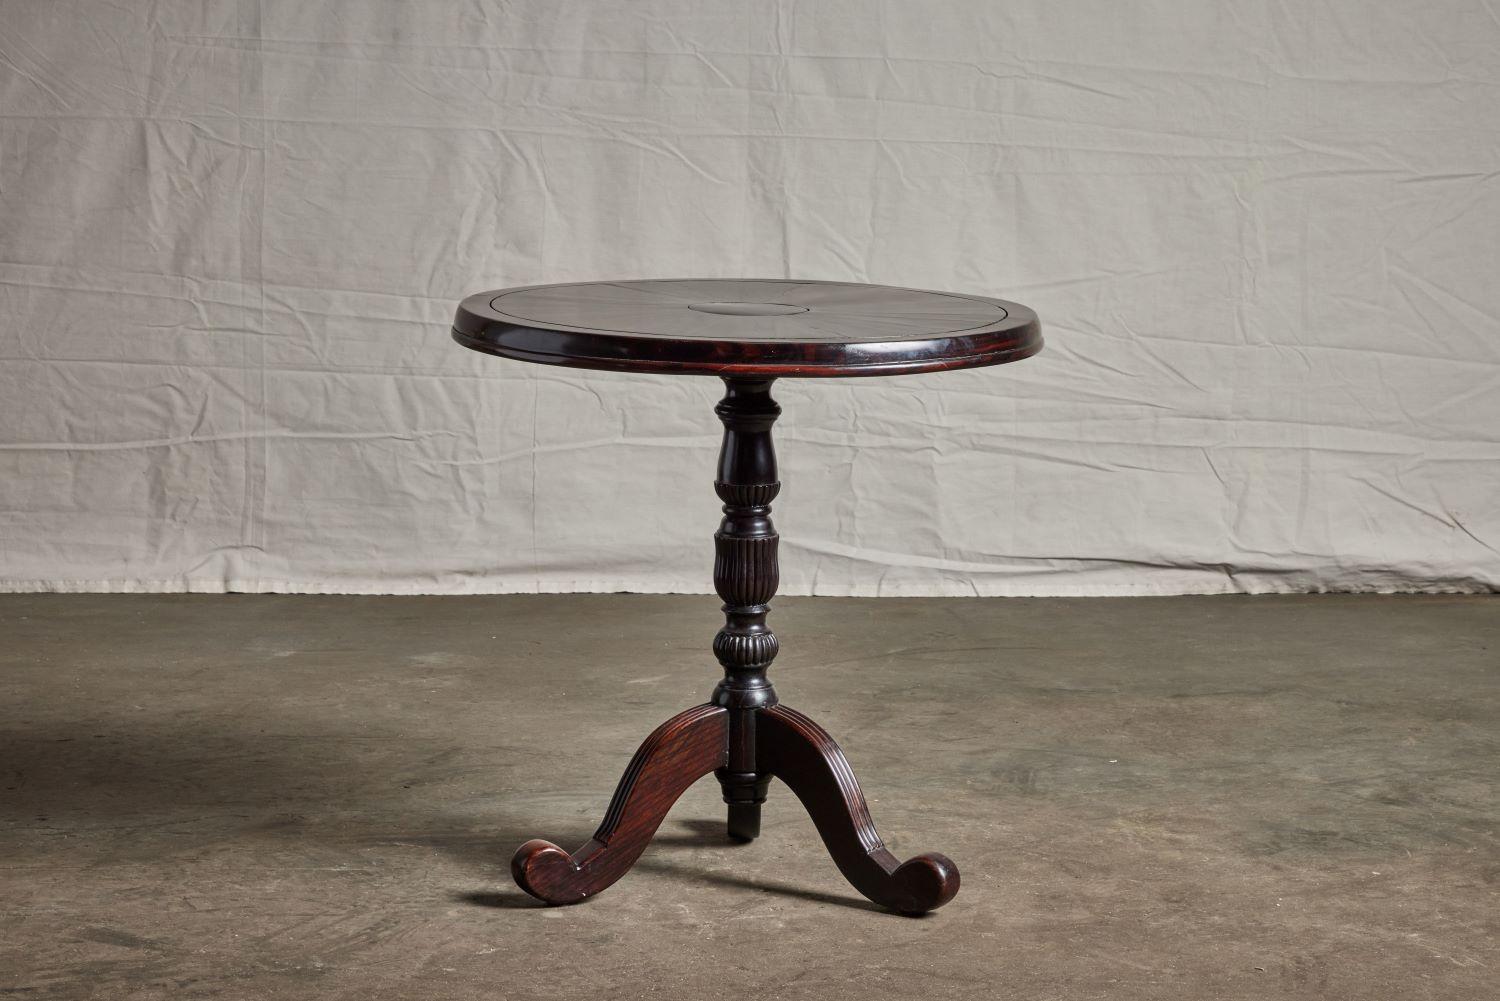 A 19th century British Colonial ebony pedestal table featuring a turned and fluted pedestal and three carved legs.